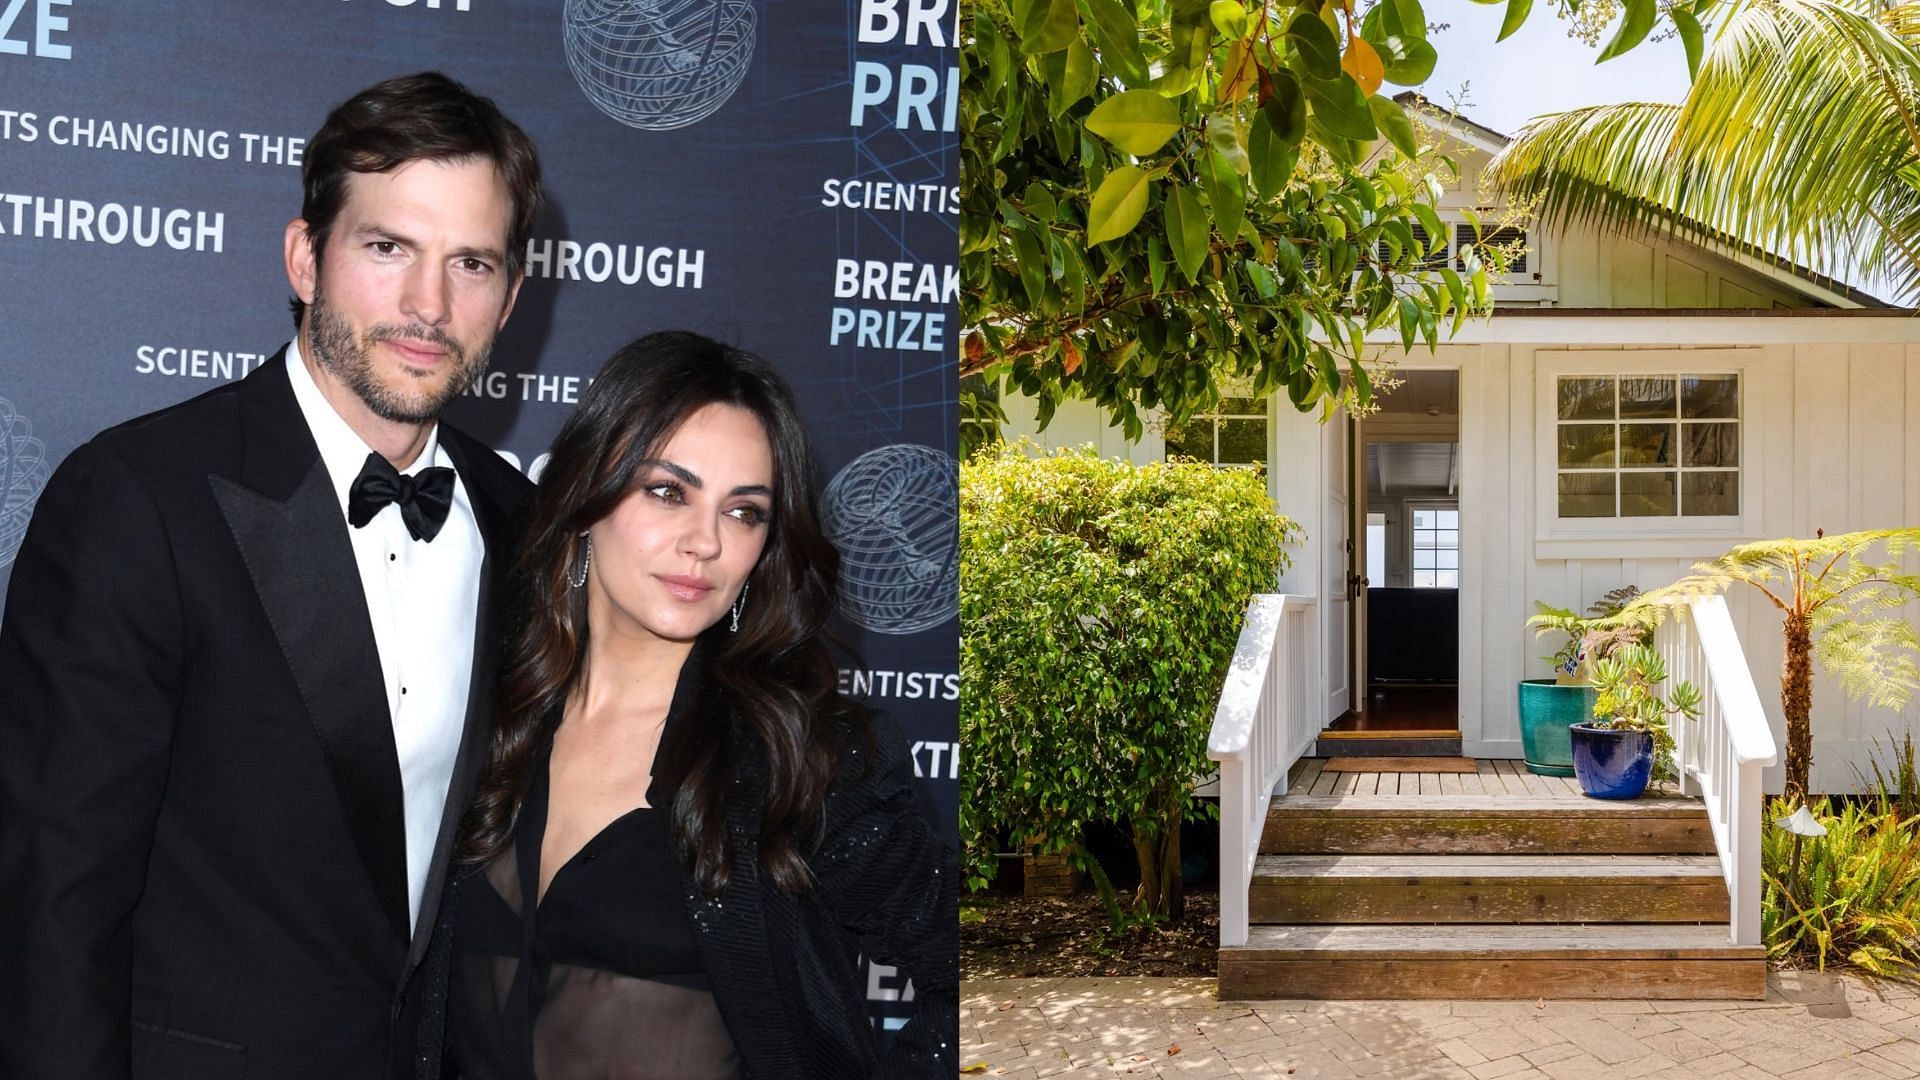 Mila Kunis and Ashton Kutcher are renting out their ocean front house as an Airbnb. (Images via Getty Images &amp; Katya Grozovskya)